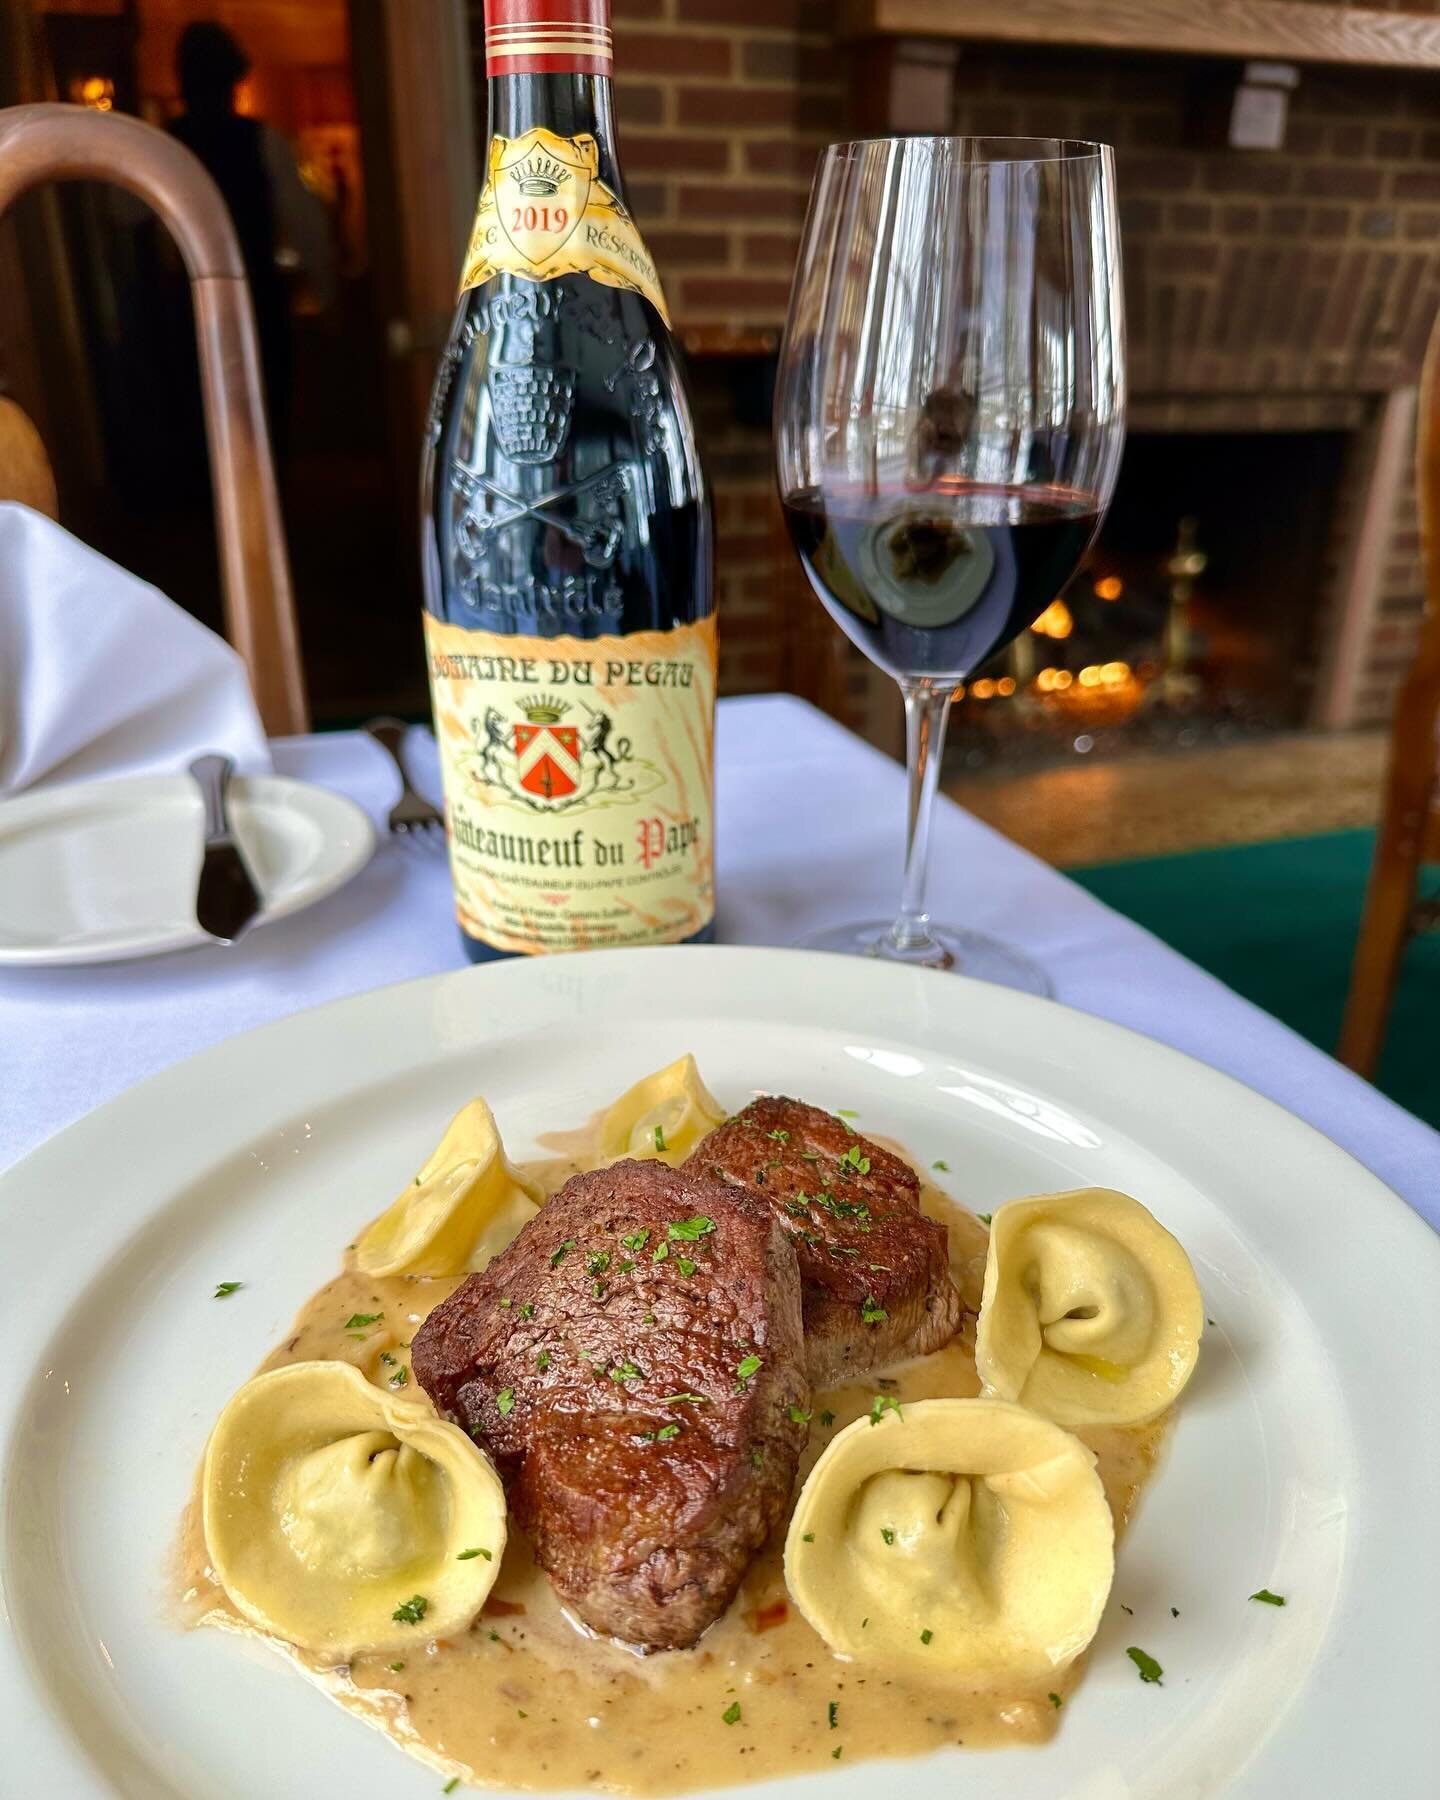 Weekend feature: Handmade mushroom tortellini in a bourbon cream sauce, paired with pan-seared filet medallions. Let us help find the perfect bottle for this luxurious dish.

#handmadepasta #freshpasta #filetmignon #tortellini #creamsauce #chateaupeg